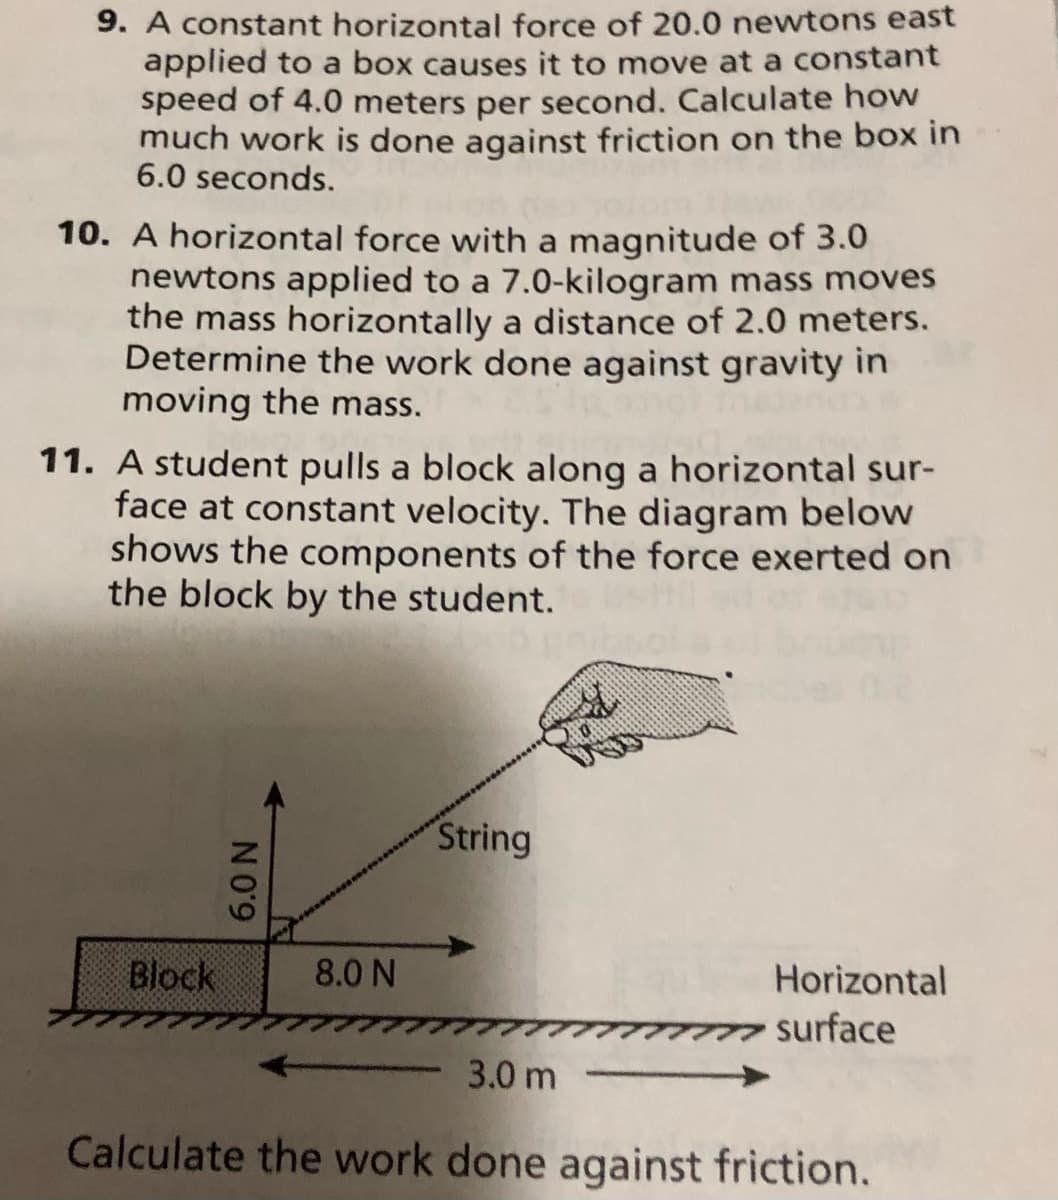 9. A constant horizontal force of 20.0 newtons east
applied to a box causes it to move at a constant
speed of 4.0 meters per second. Calculate how
much work is done against friction on the box in
6.0 seconds.
10. A horizontal force with a magnitude of 3.0
newtons applied to a 7.0-kilogram mass moves
the mass horizontally a distance of 2.0 meters.
Determine the work done against gravity in
moving the mass.
11.
student pulls a block along a horizontal sur-
face at constant velocity. The diagram below
shows the components of the force exerted on
the block by the student.
String
Block
8.0 N
Horizontal
surface
3.0 m
Calculate the work done against friction.
6.0 N
